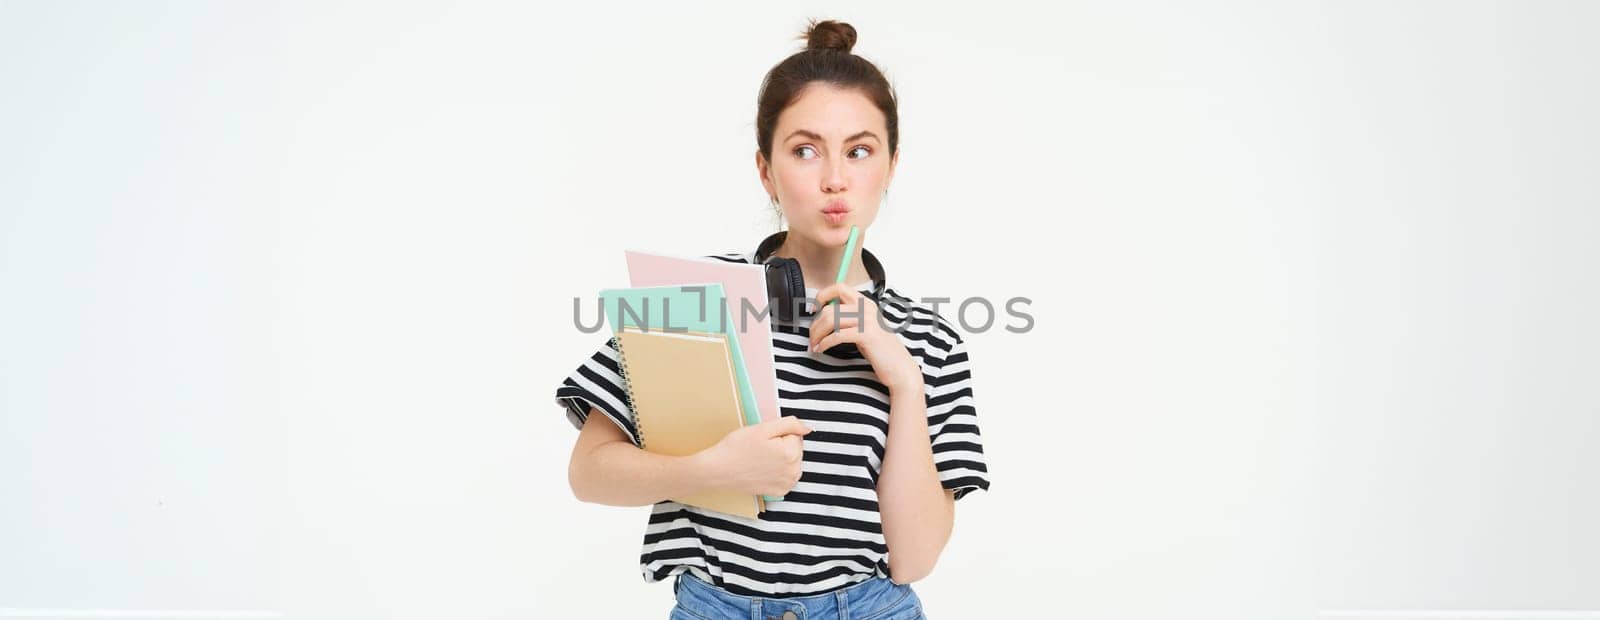 Image of young woman, tutor with books and notebooks, wearing headphones over her neck, isolated on white background. Student lifestyle concept by Benzoix